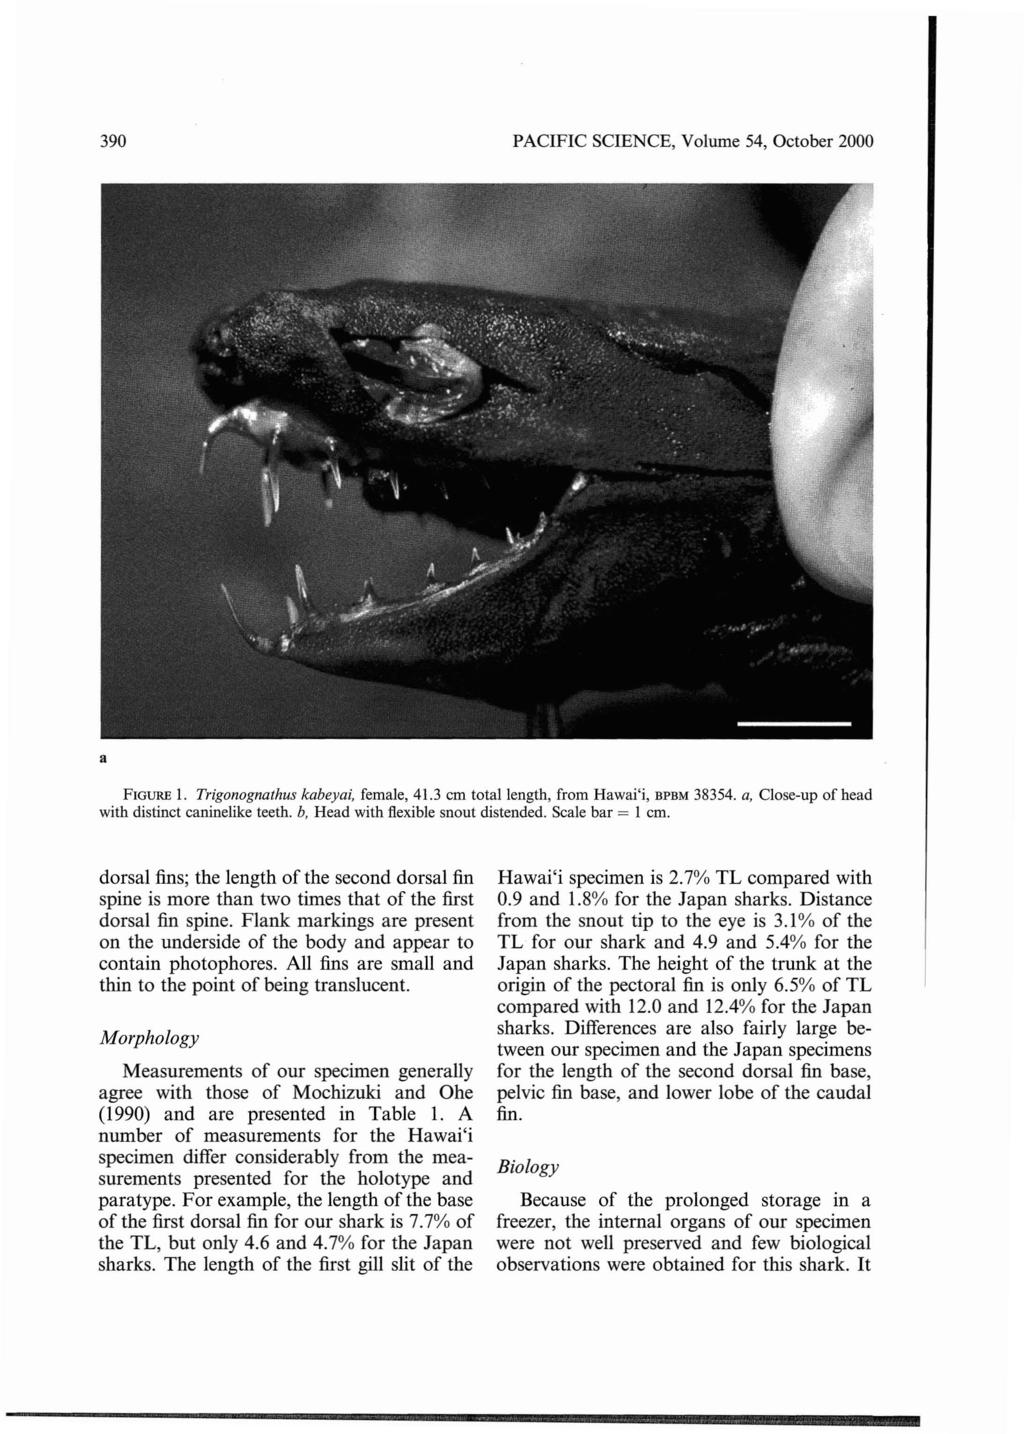 390 PACIFIC SCIENCE, Volume 54, October 2000 a FIGURE 1. Trigonognathus kabeyai, female, 41.3 em total length, from Hawai'i, BPBM 38354. a, Close-up of head with distinct caninelike teeth.